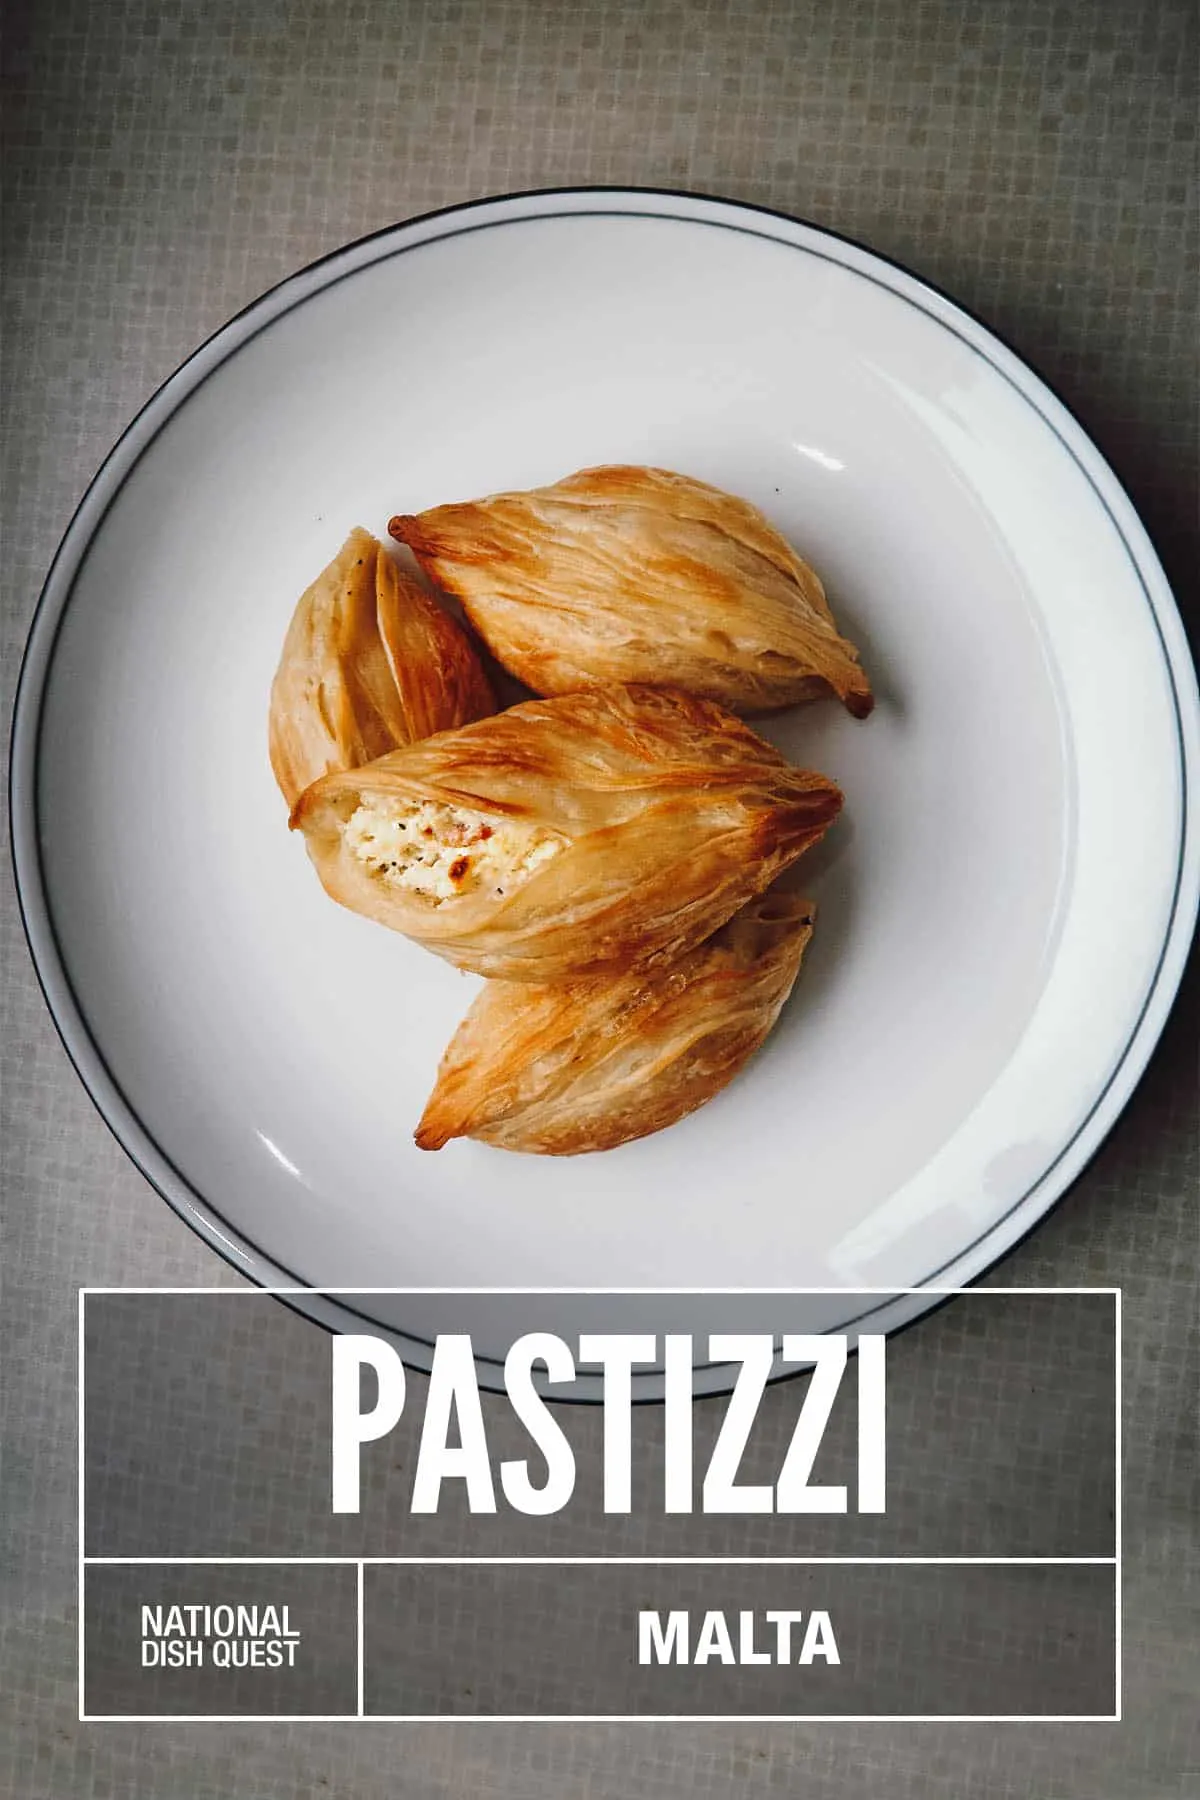 Plate of pastizzi